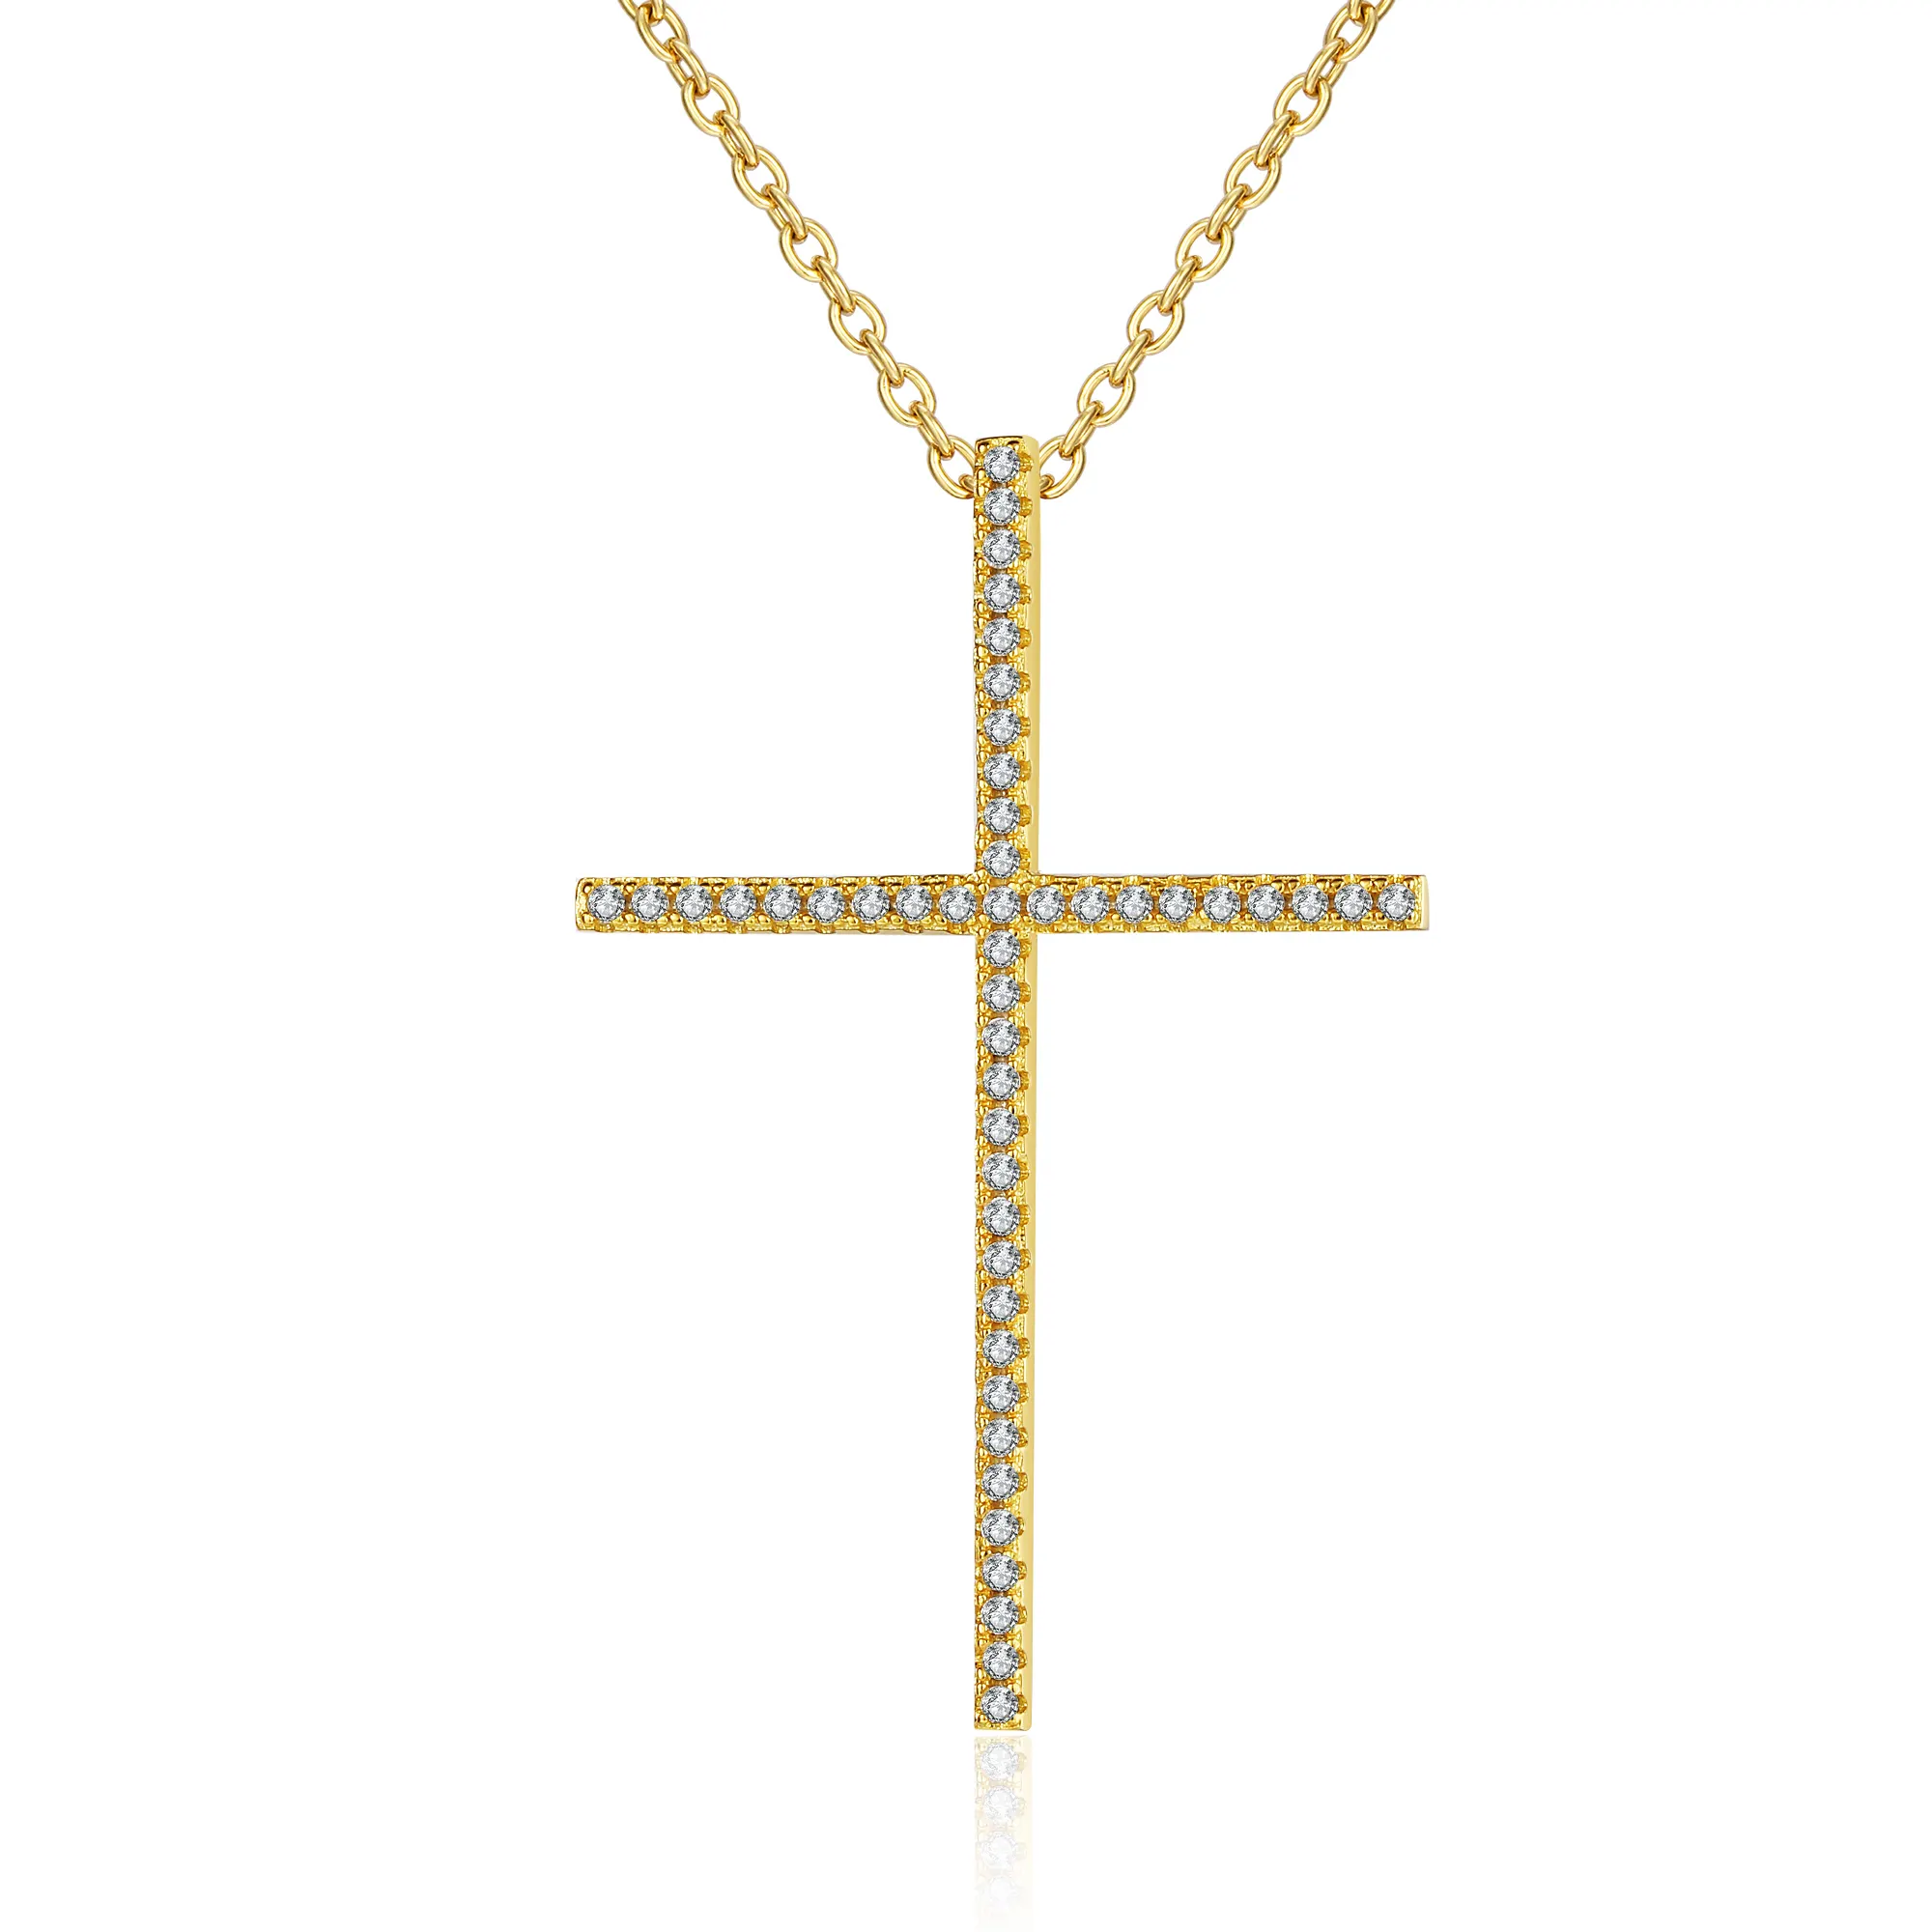 Exquisite High Quality Christian Religious Jewelry For Men Women Sterling Silver Gold Plated Cross Chain Necklace